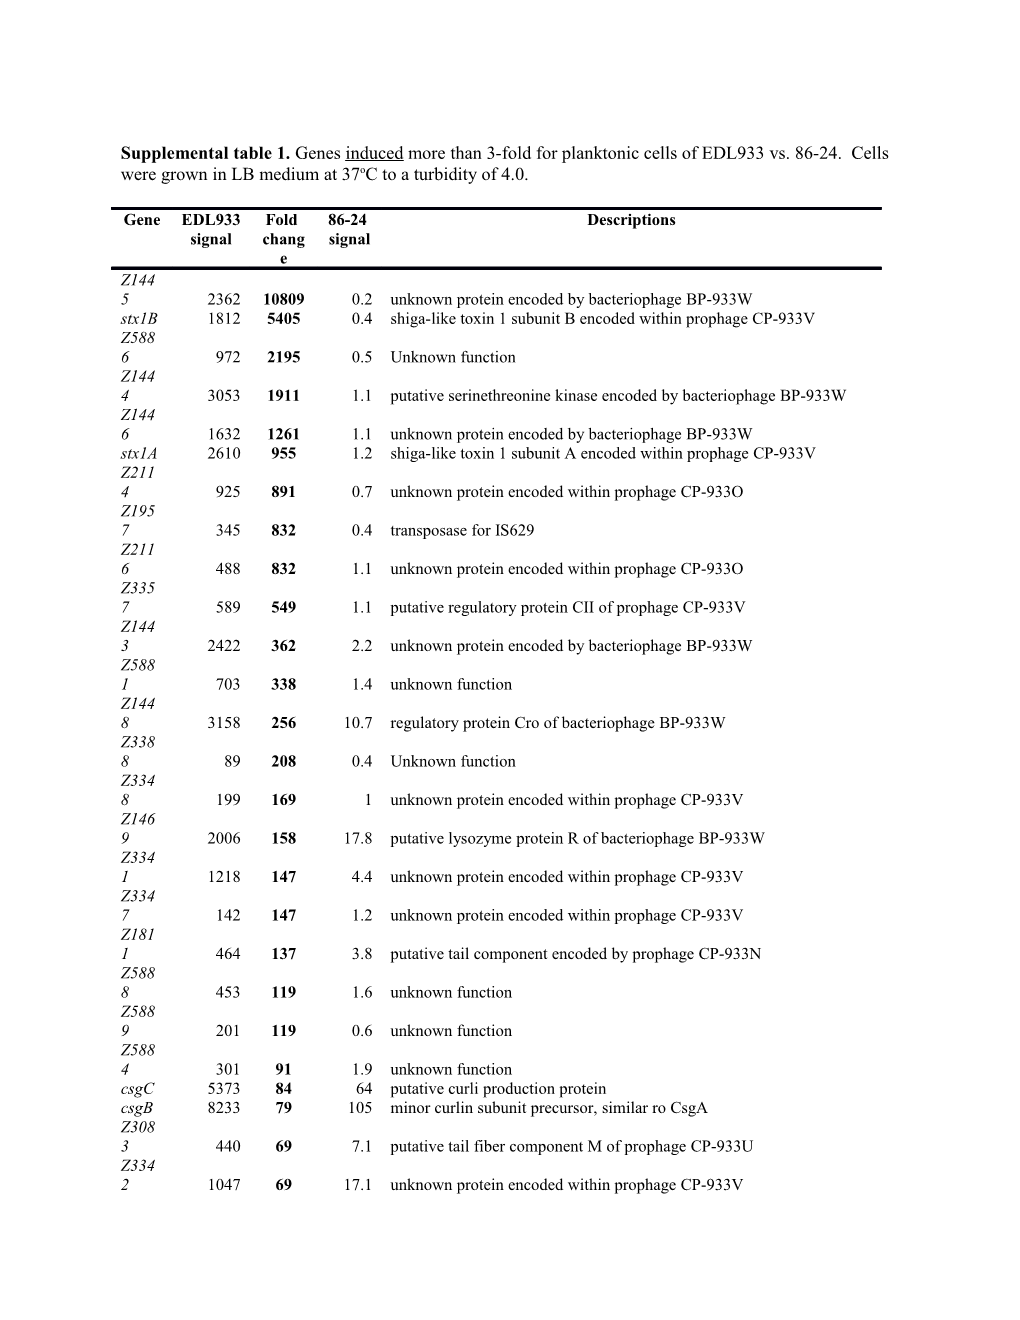 Supplemental Table 1. Genes Inducedmore Than 3-Fold for Planktonic Cells of EDL933 Vs